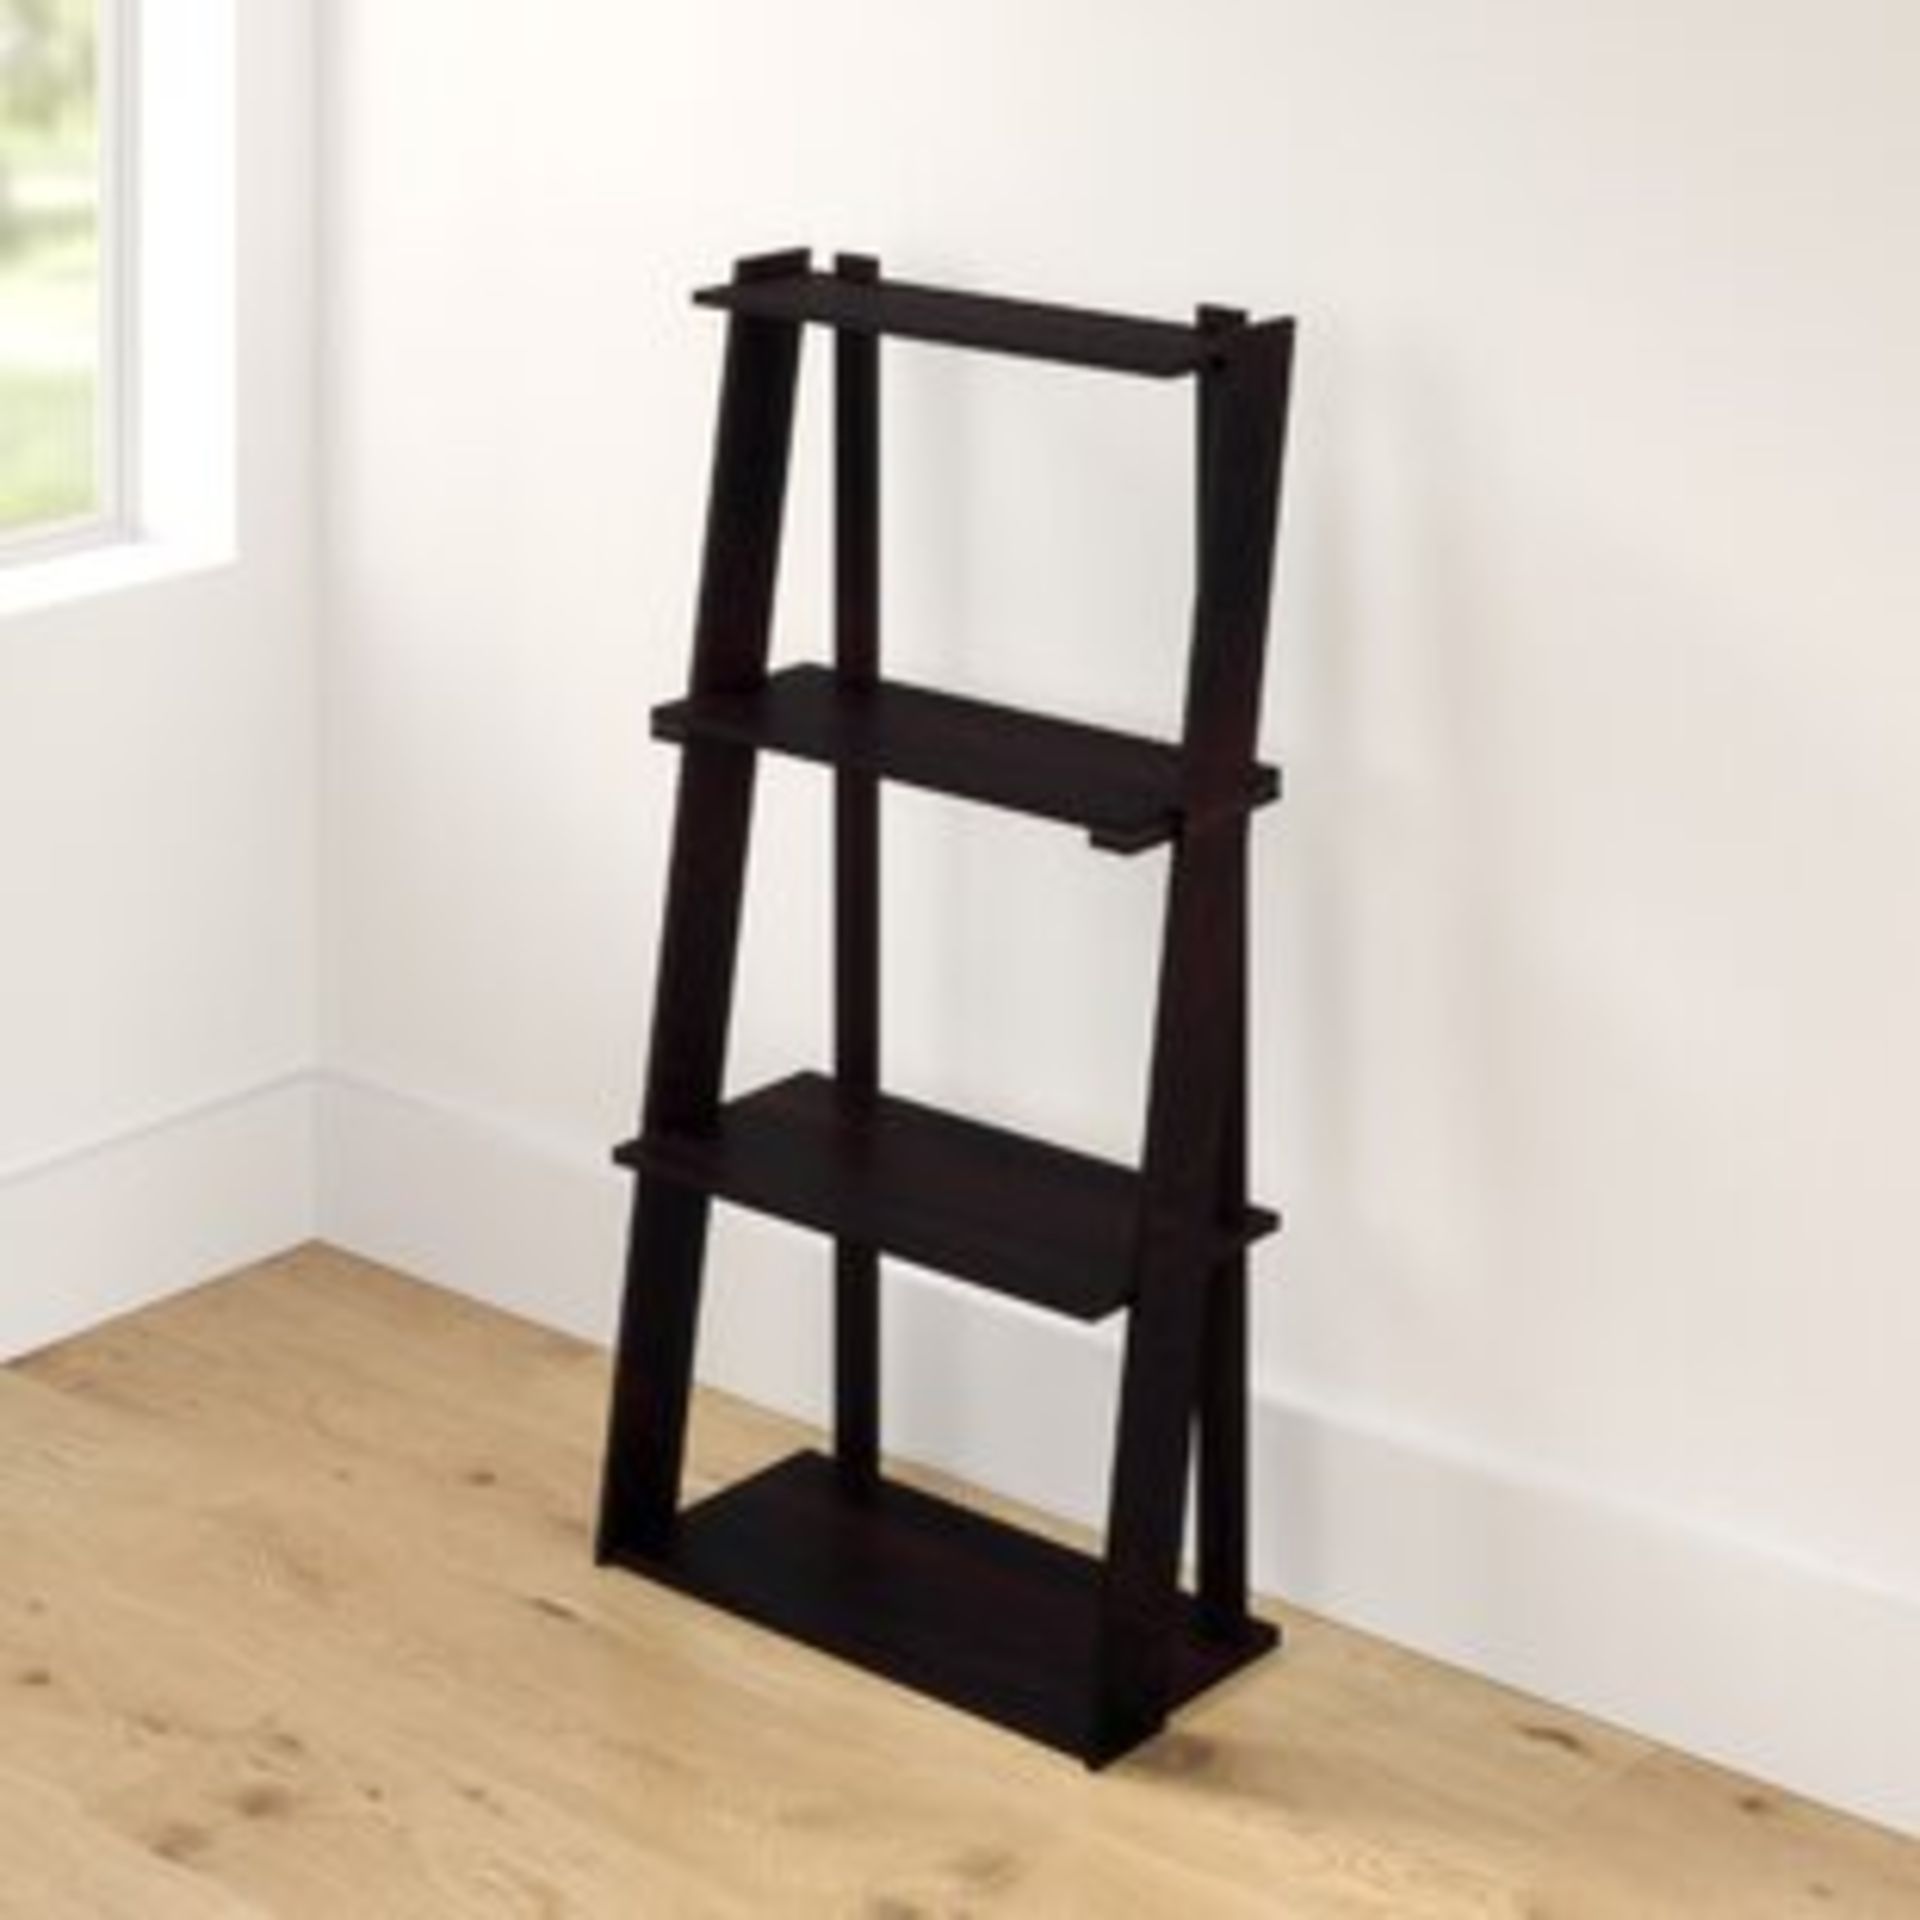 Statun Tall Bookcase RRP £100 (18089) (IMAGES